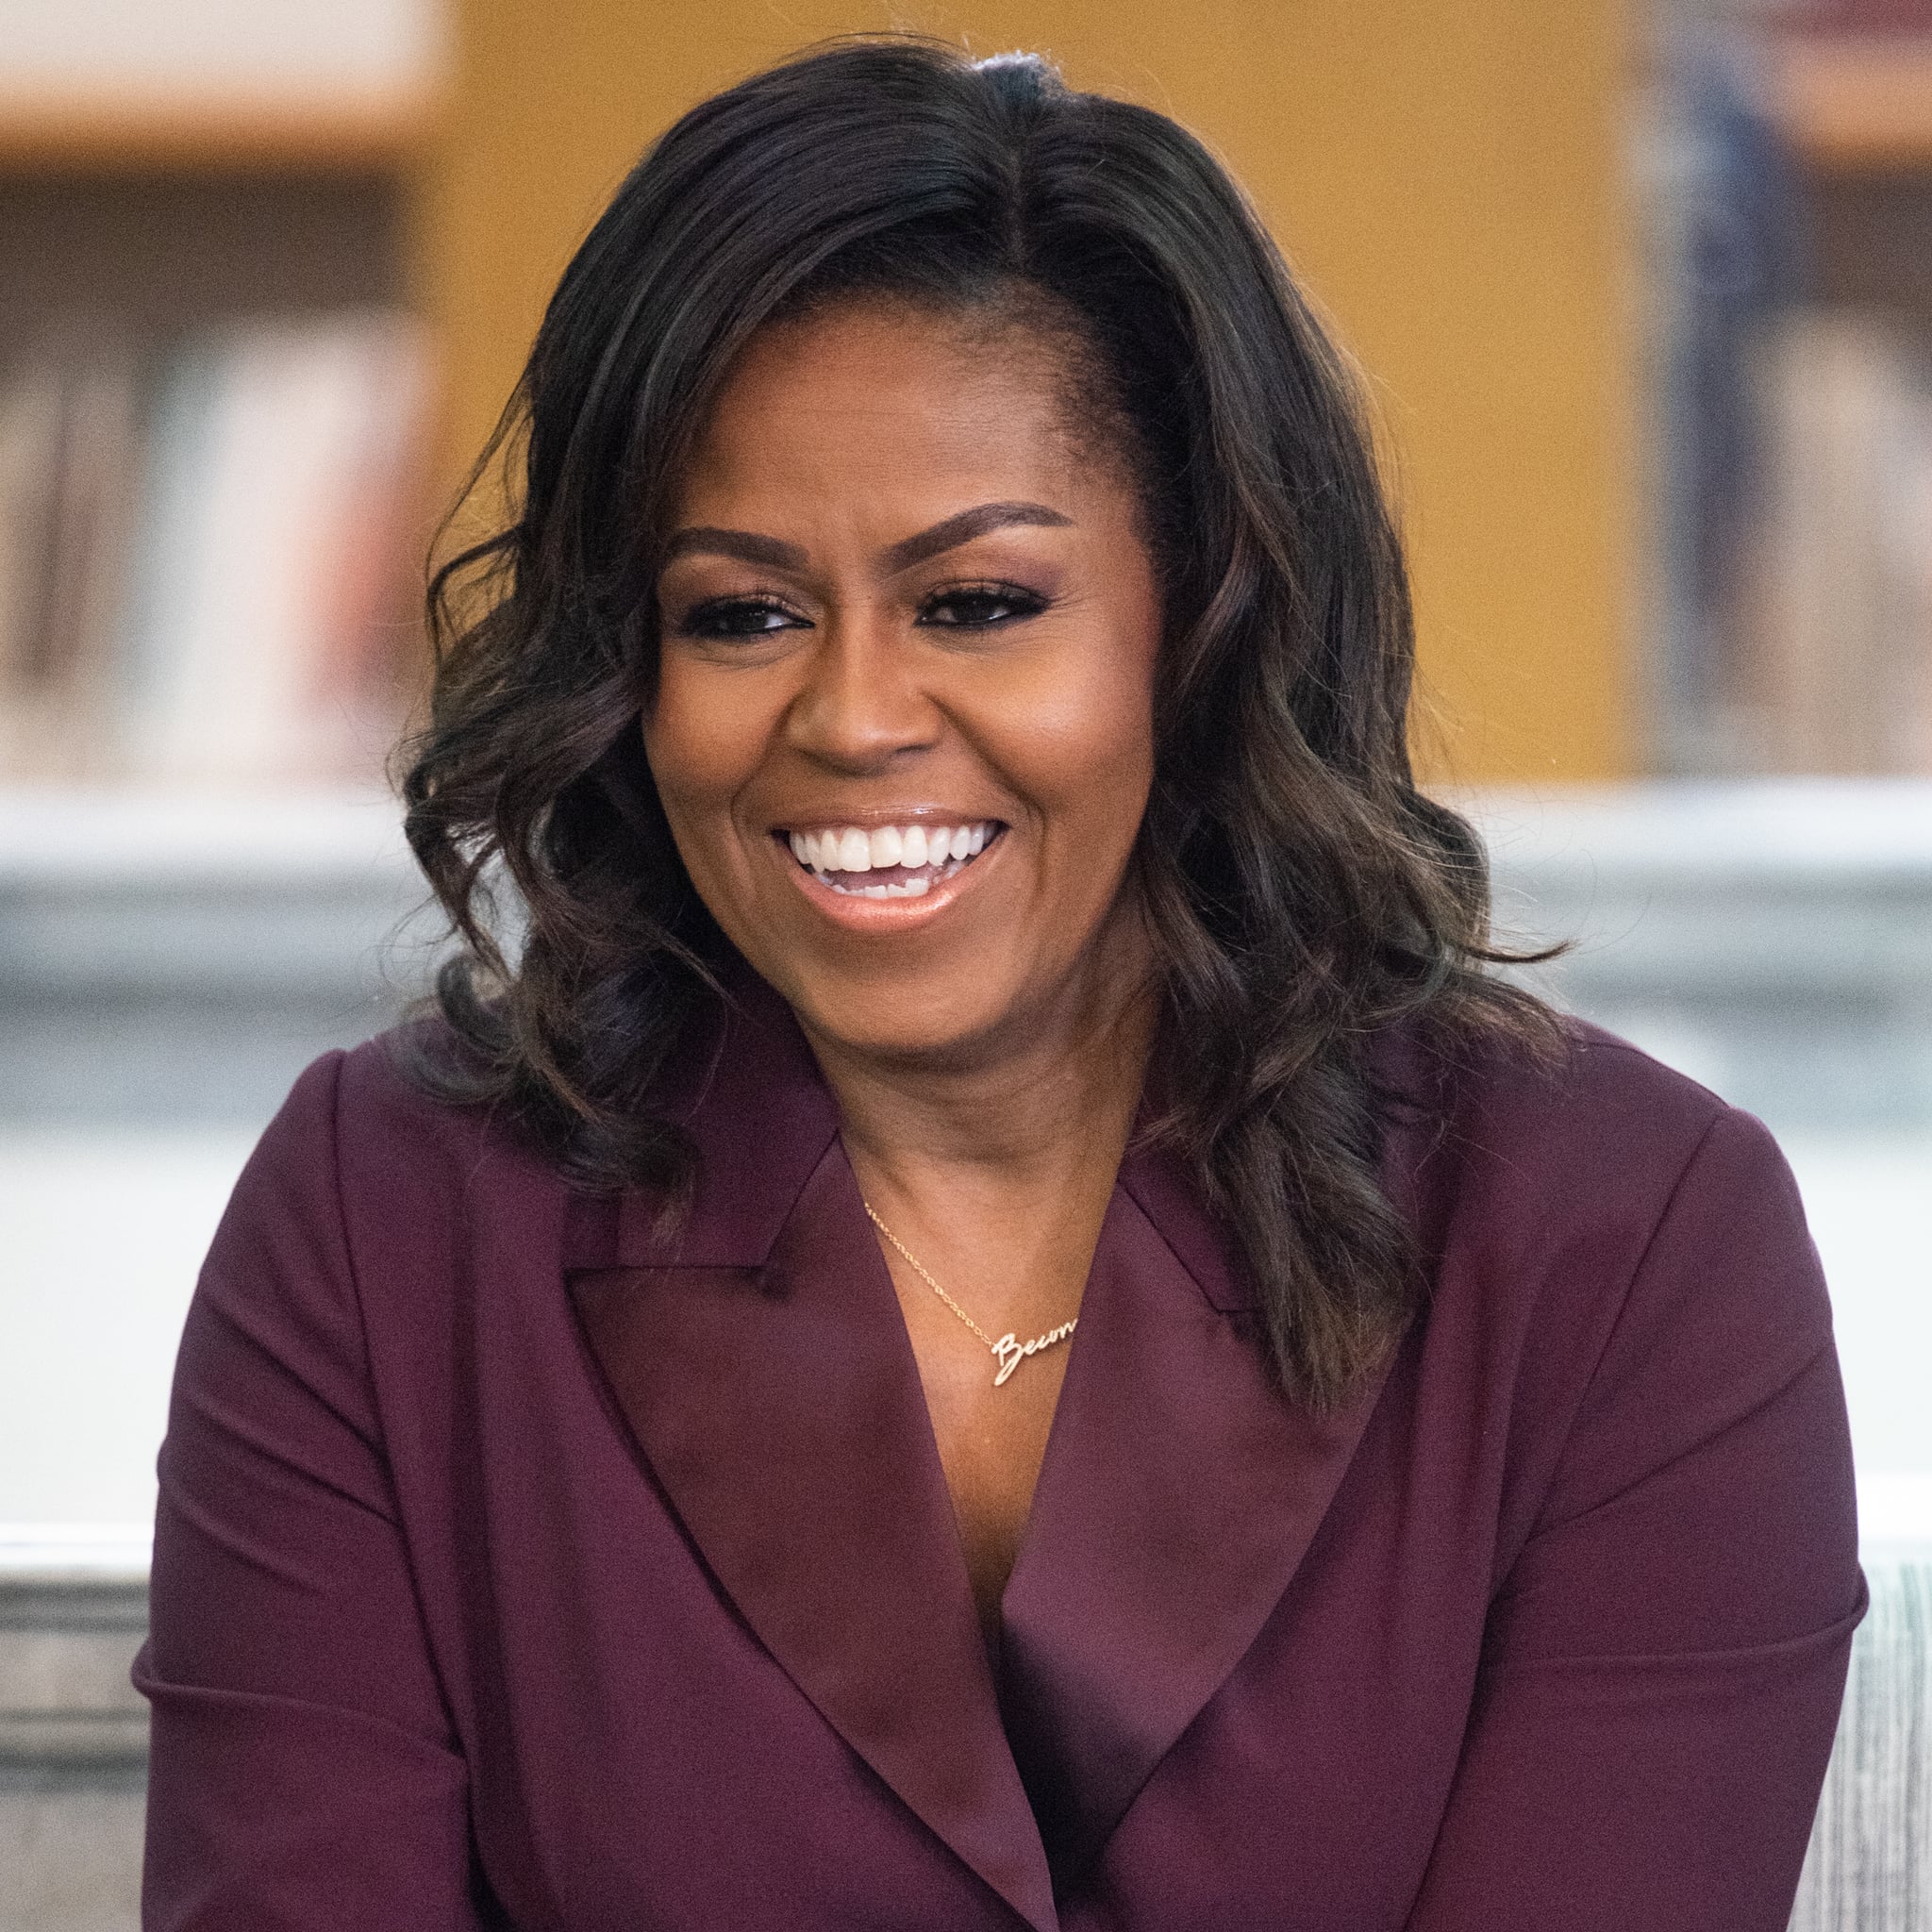 Michelle Obama Shows Off Her Natural Beauty In THIS Birthday Selfie!